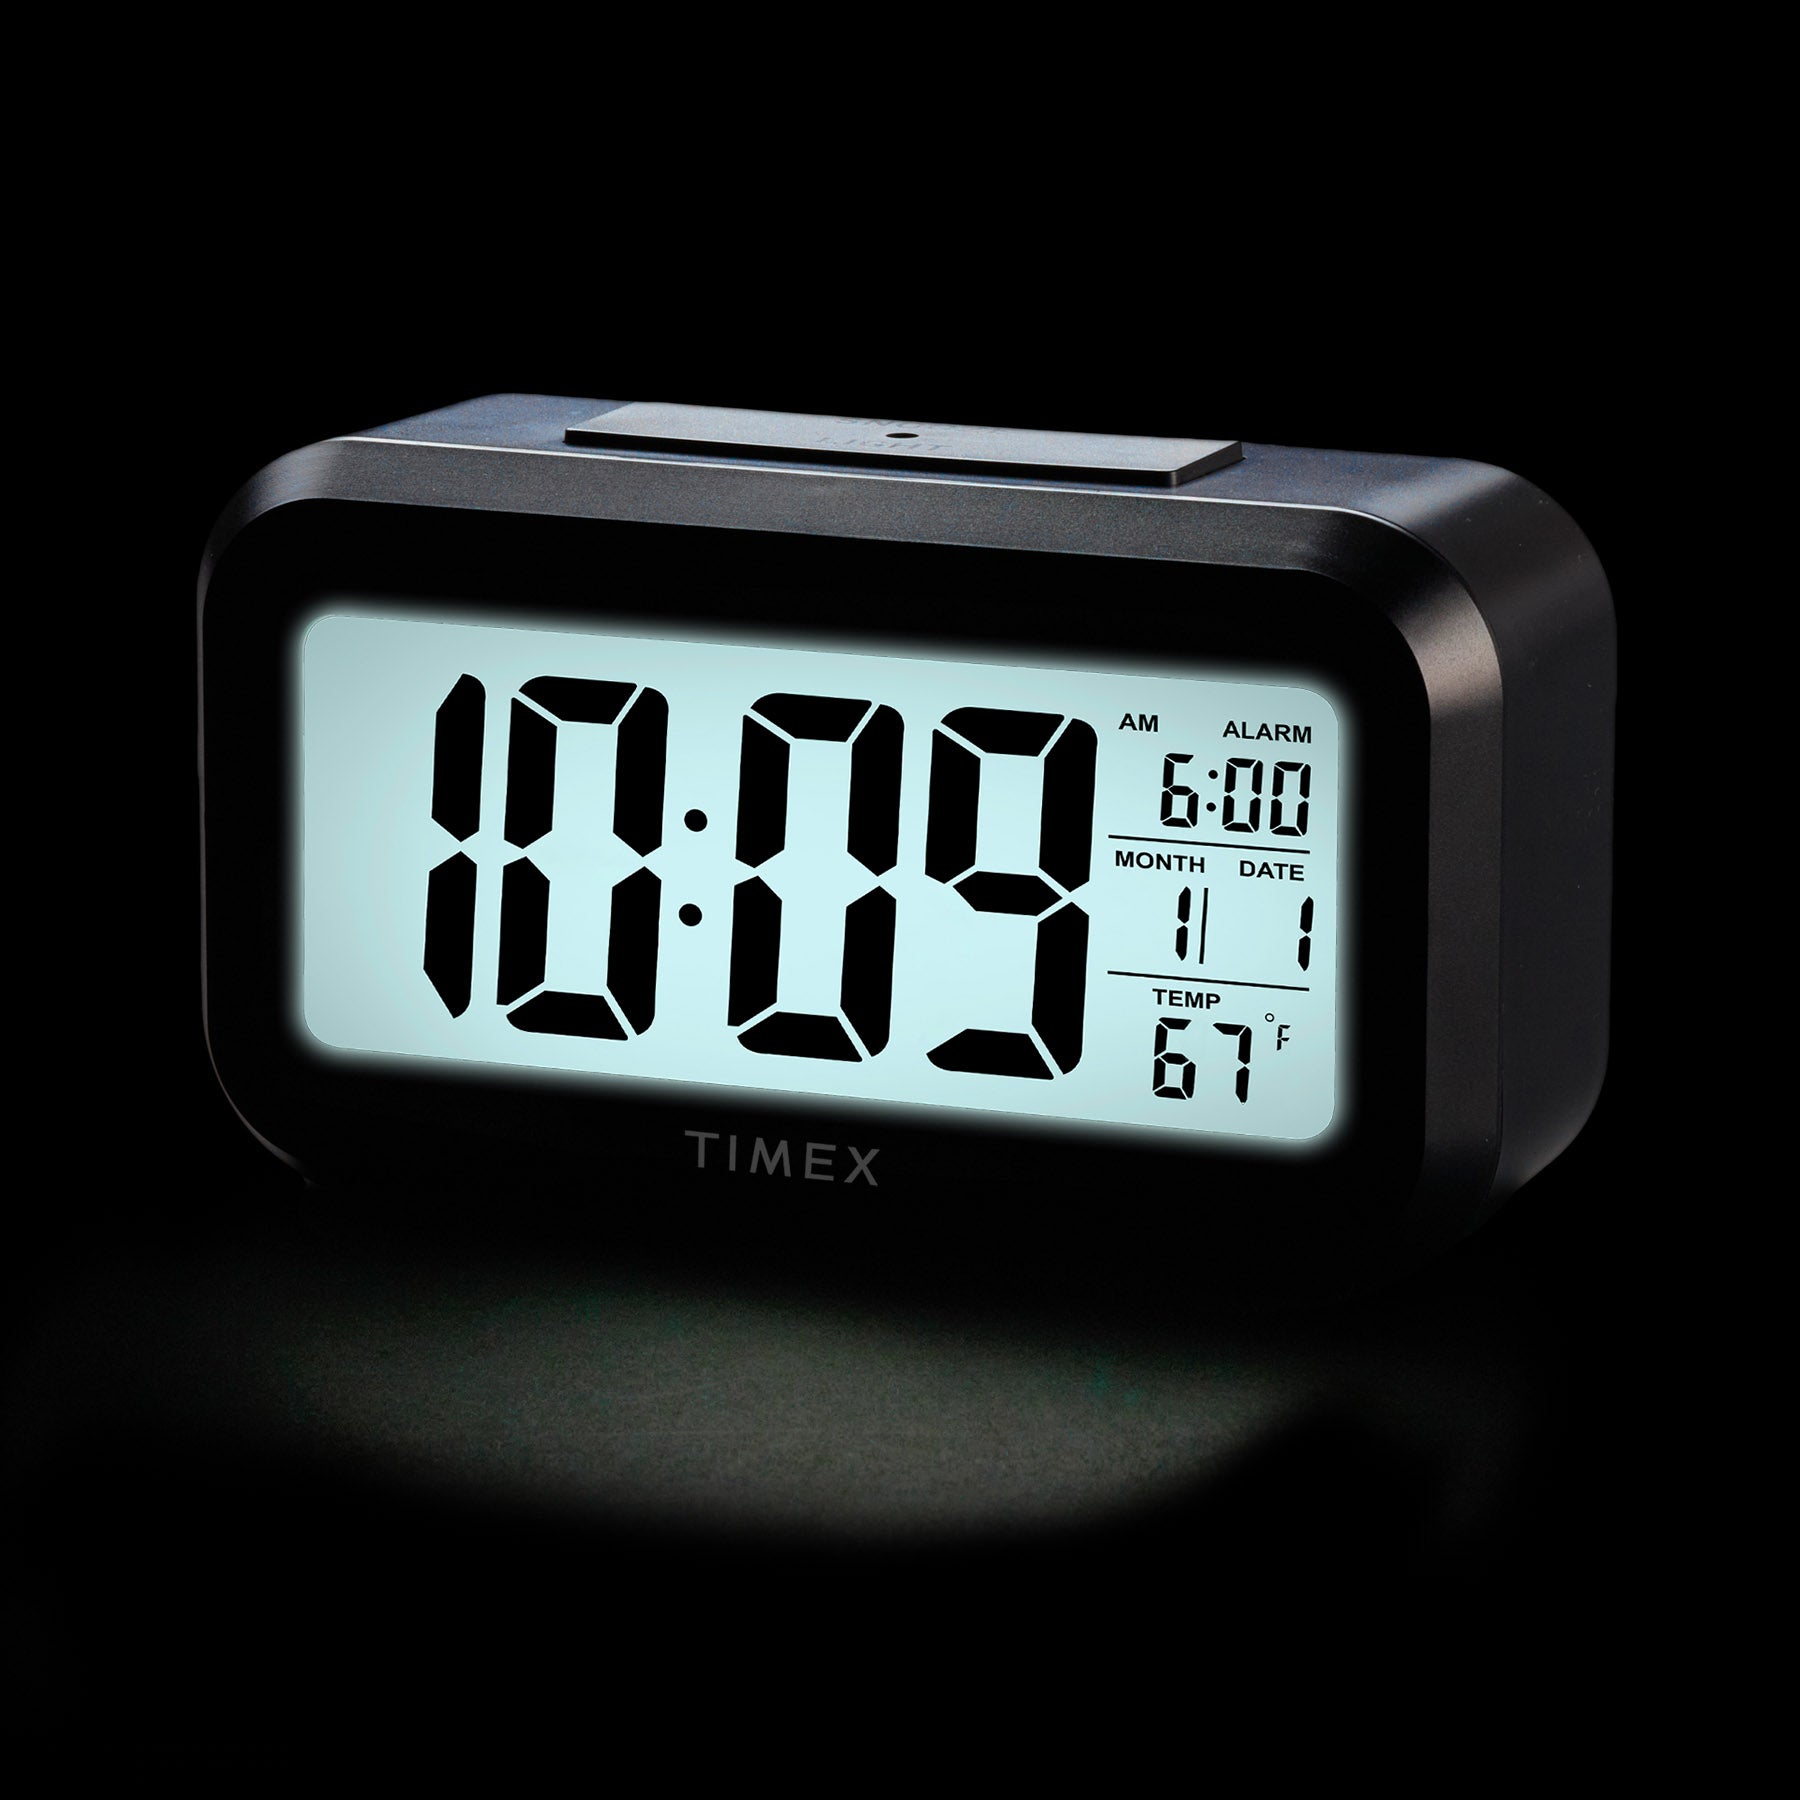 Timex Alarm Clock with Large Display, Cordless and Portable – Black (T108B)